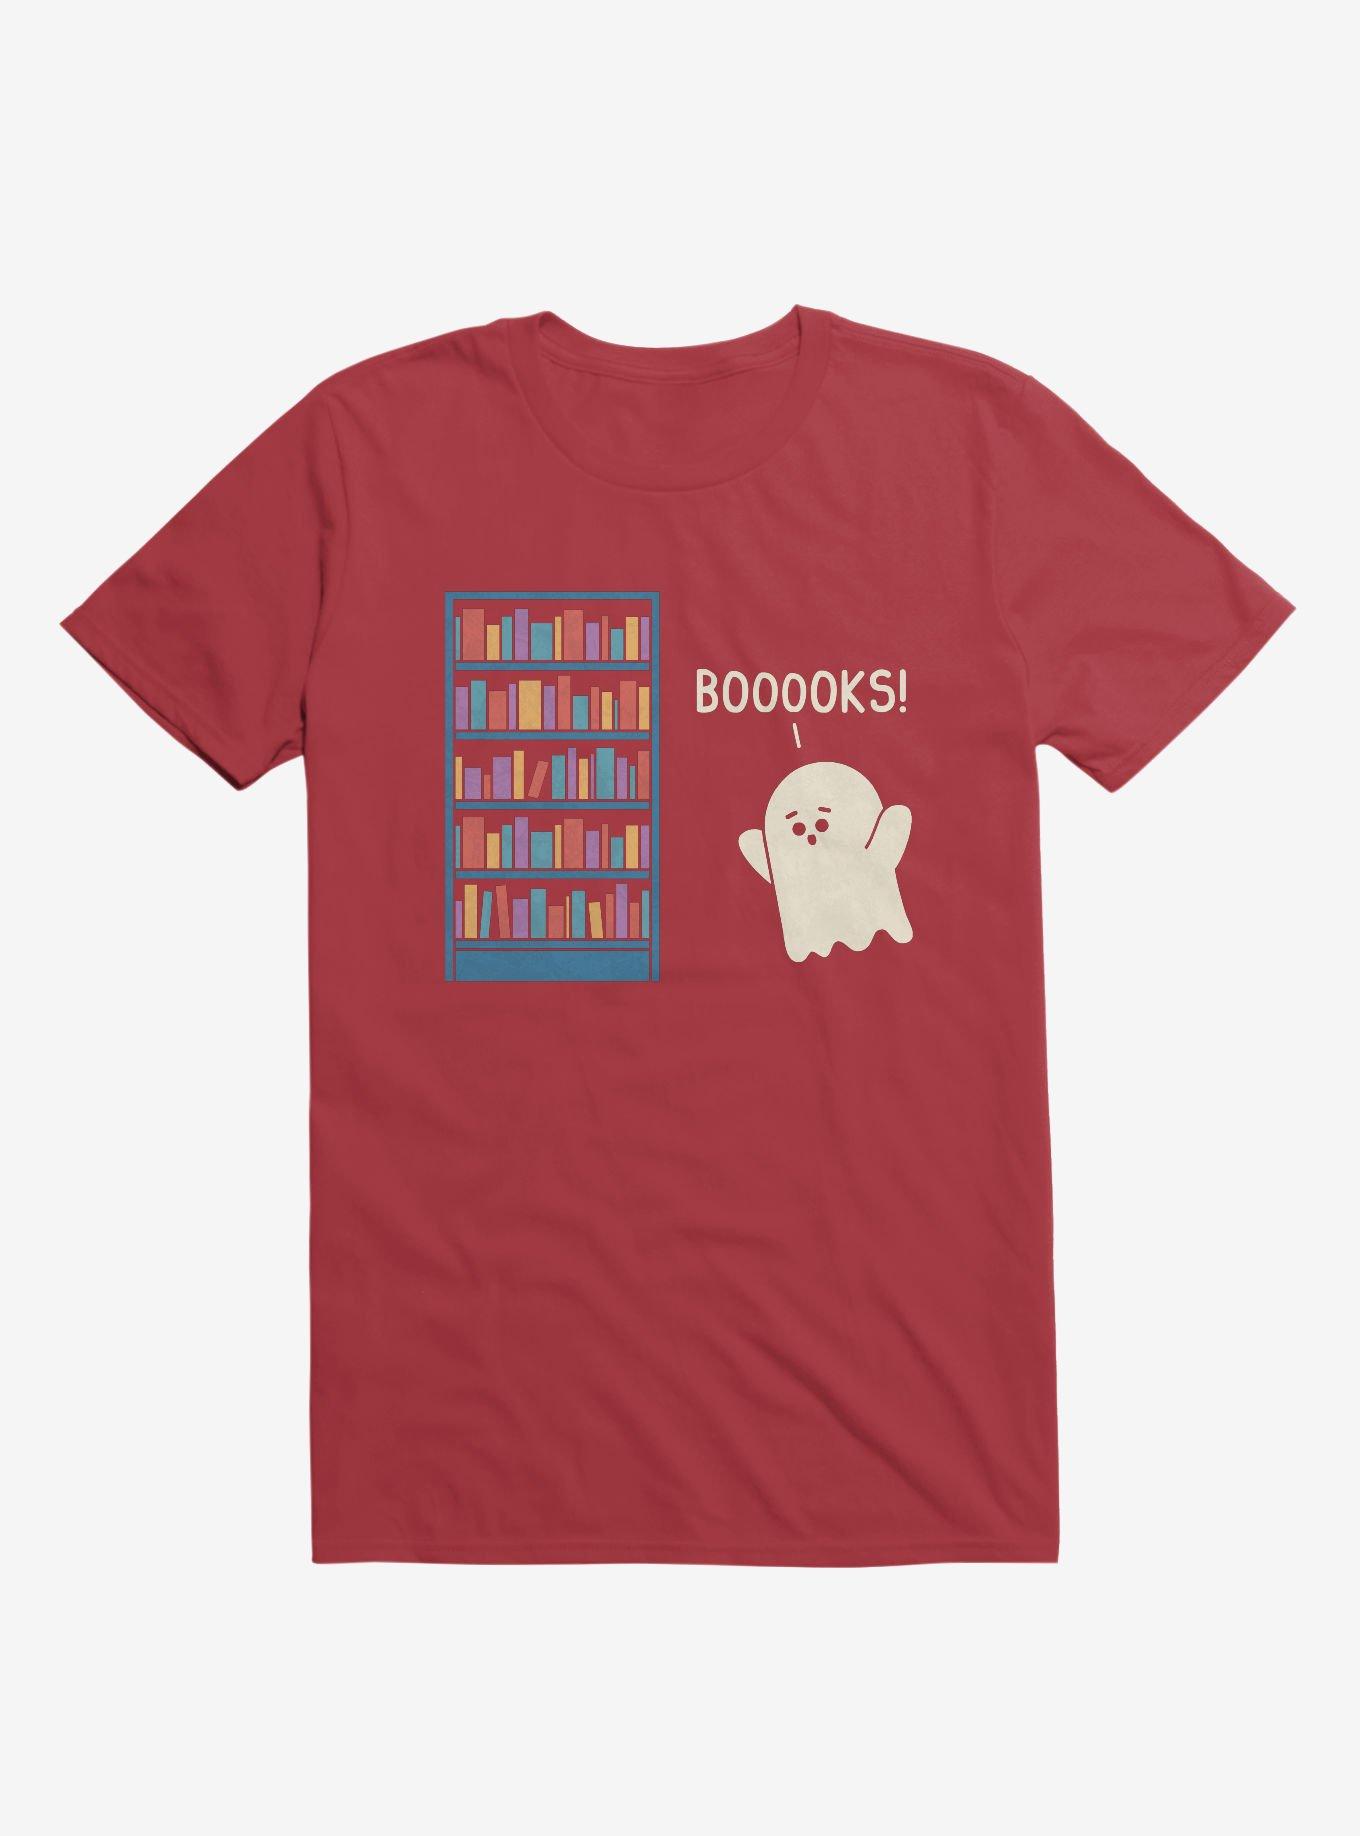 Booooks! Ghost Book Library Lover Red T-Shirt, RED, hi-res